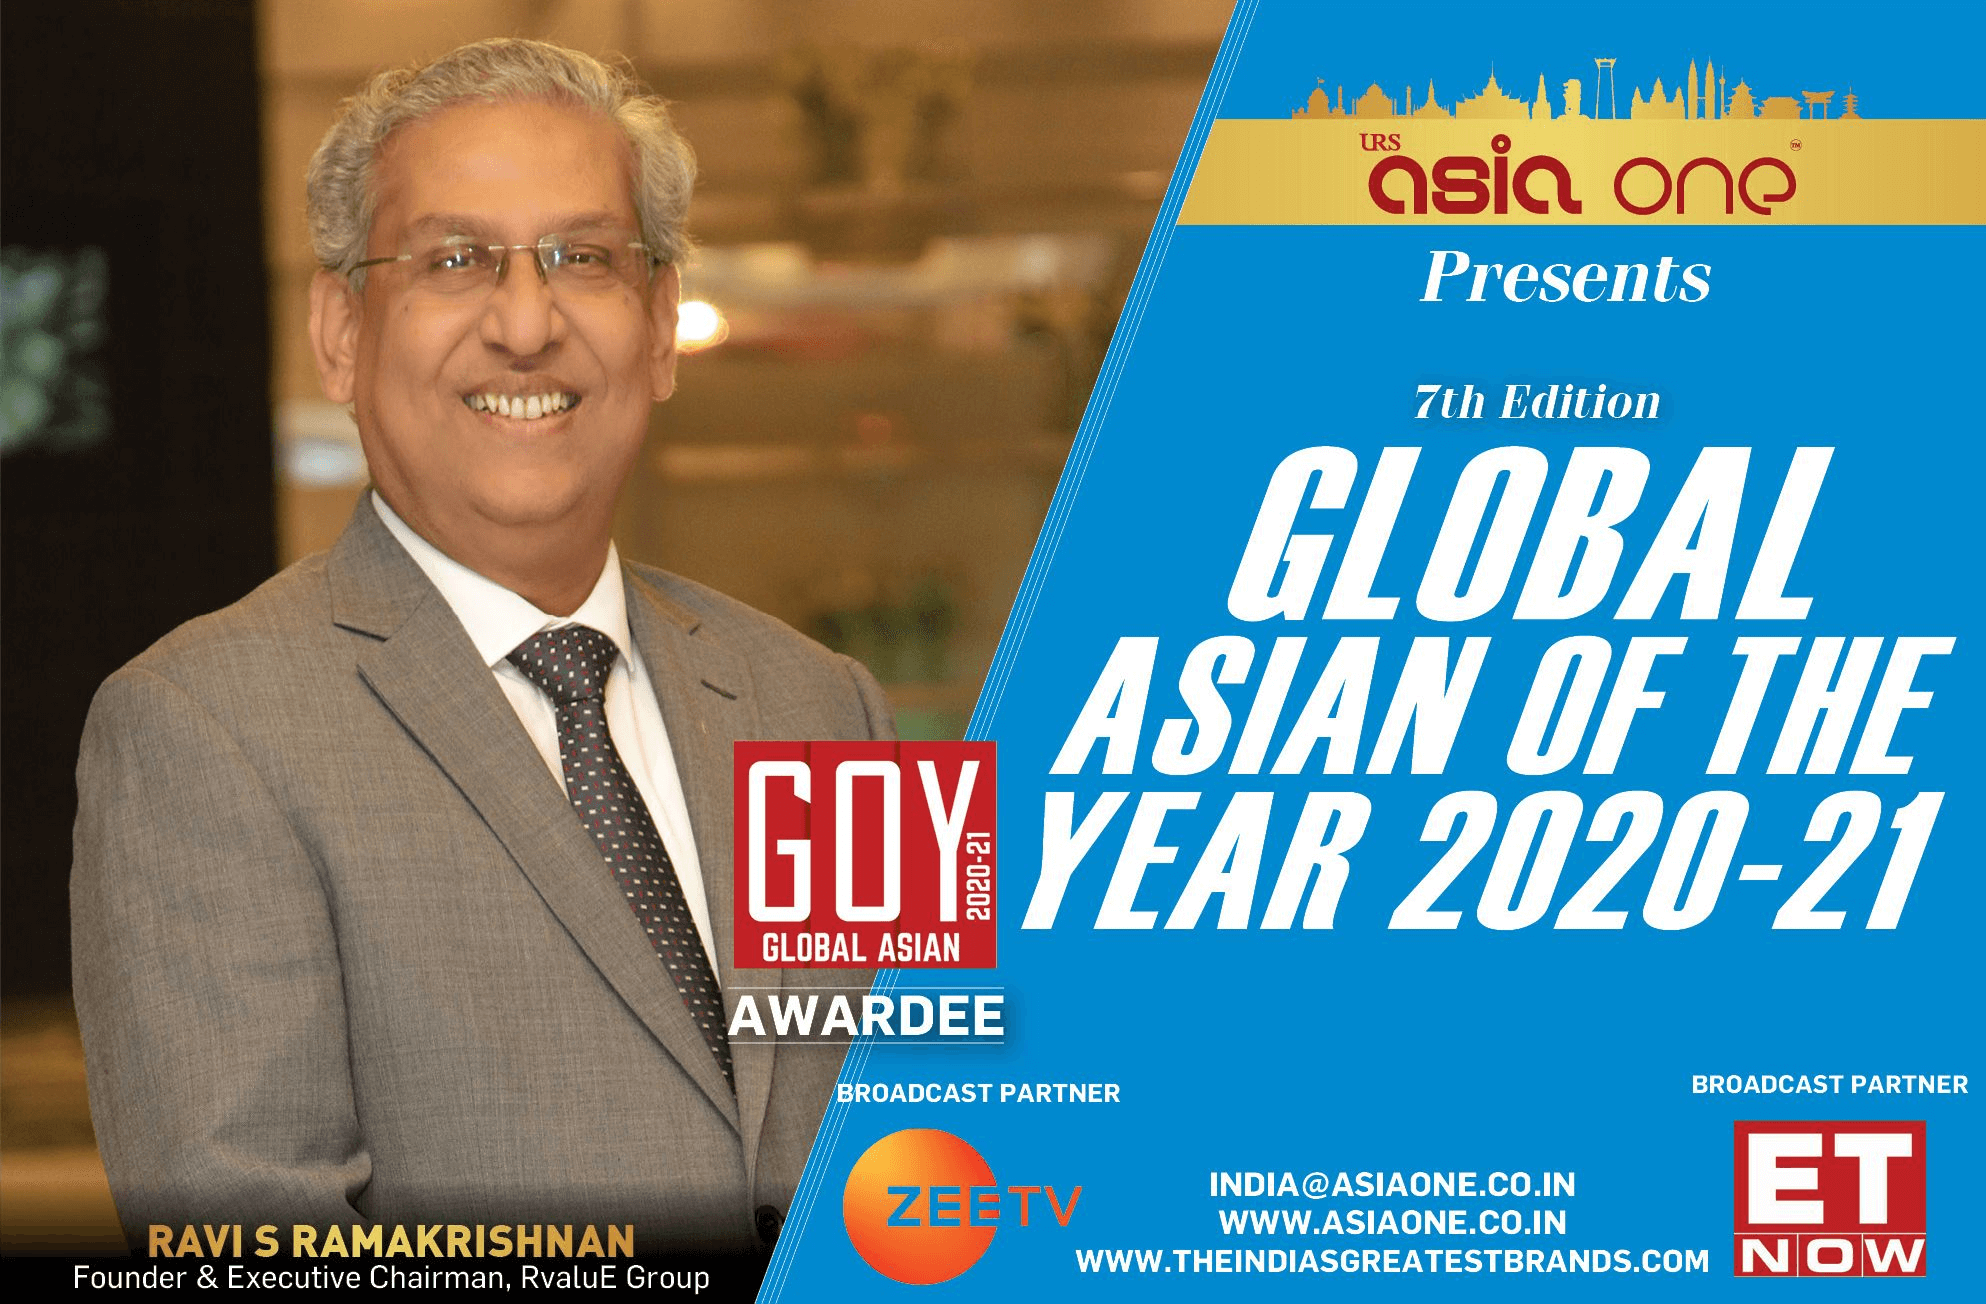 Global Asian of the Year 2020-21